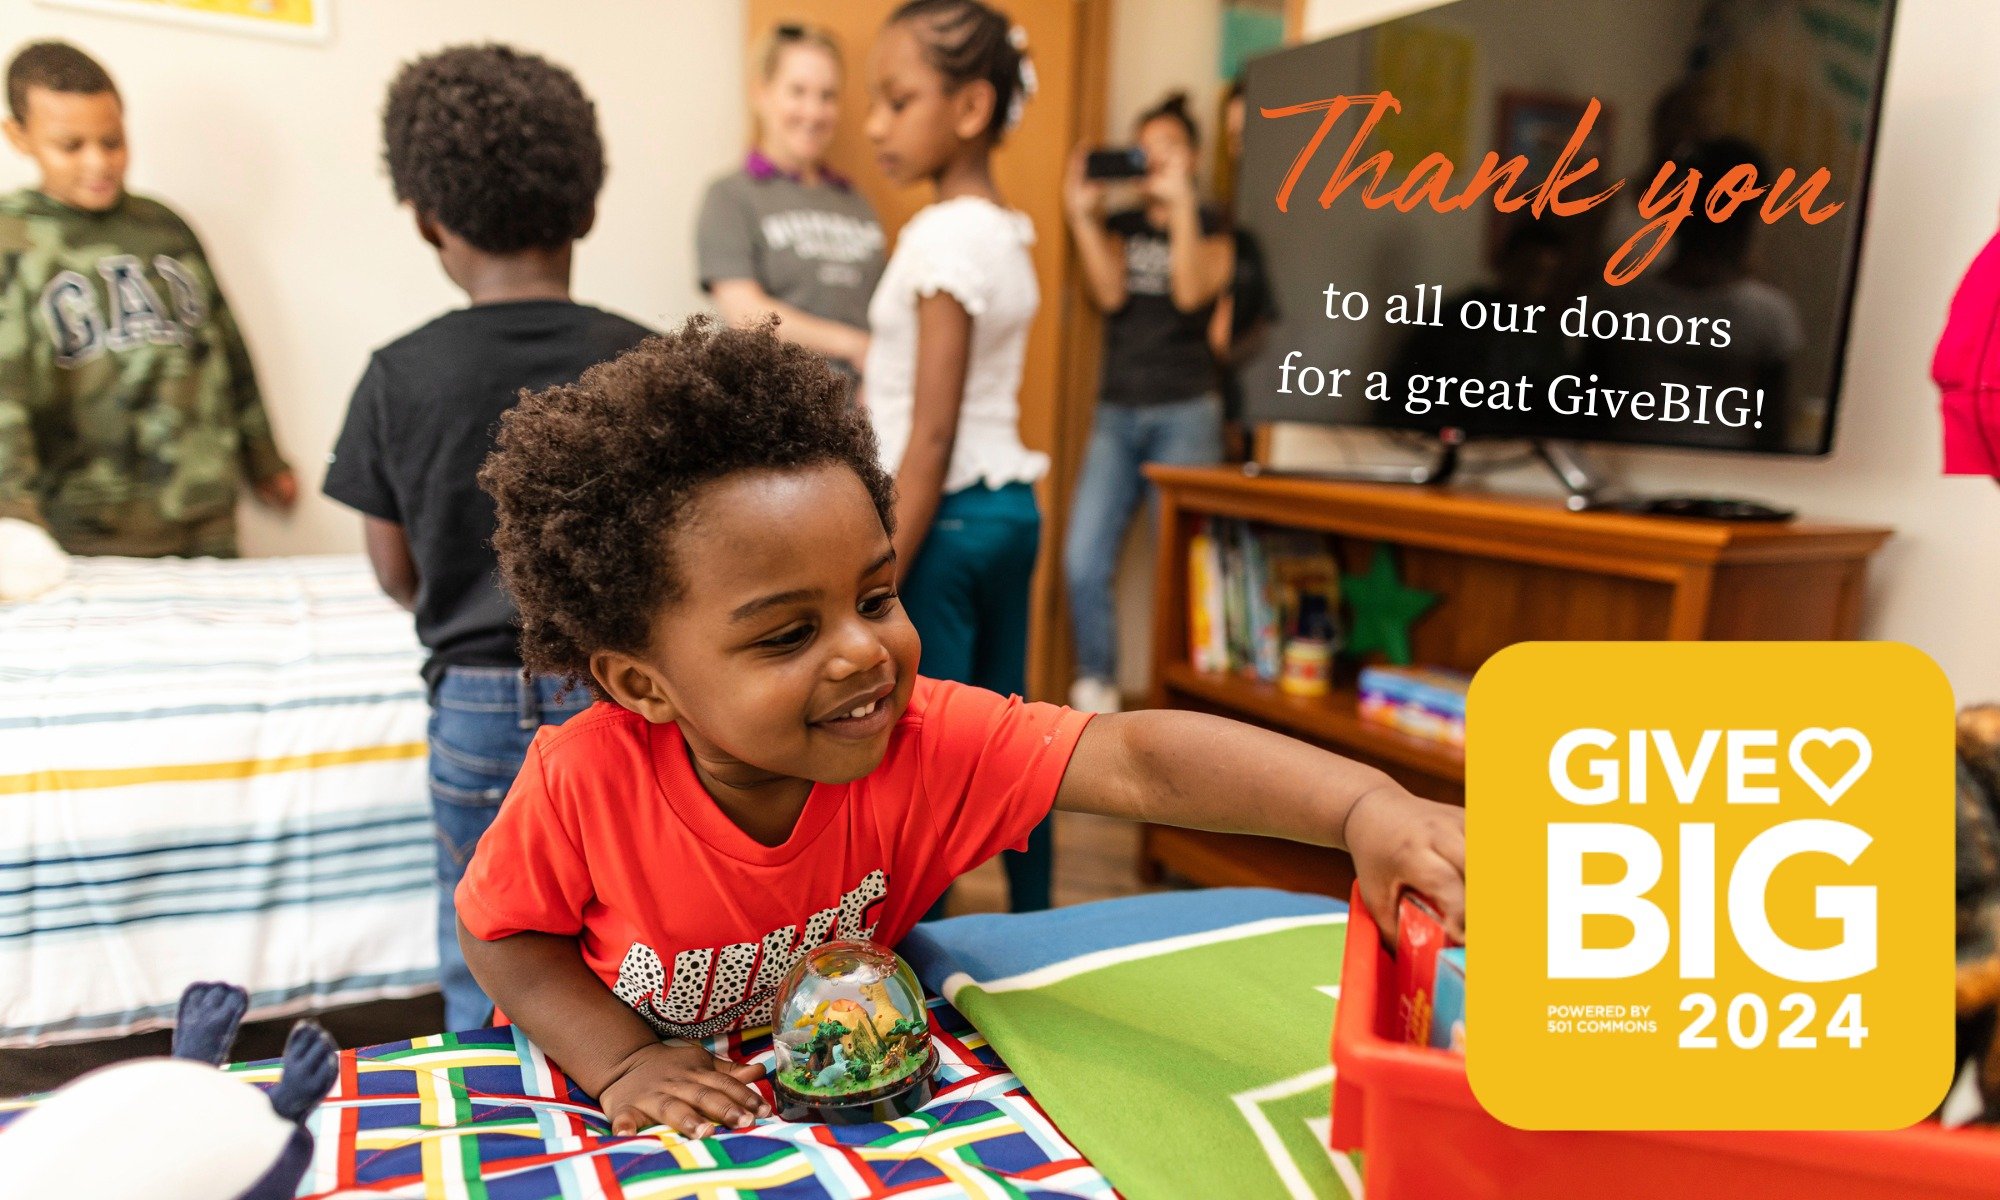 Thank you to all the wonderful people who donated to make this year's #GiveBIG a successful event! Your donations help #SeattleHumbleDesign turn more houses into HOMES! 🏡💗 

For our donors, look for a special message in your email inboxes...